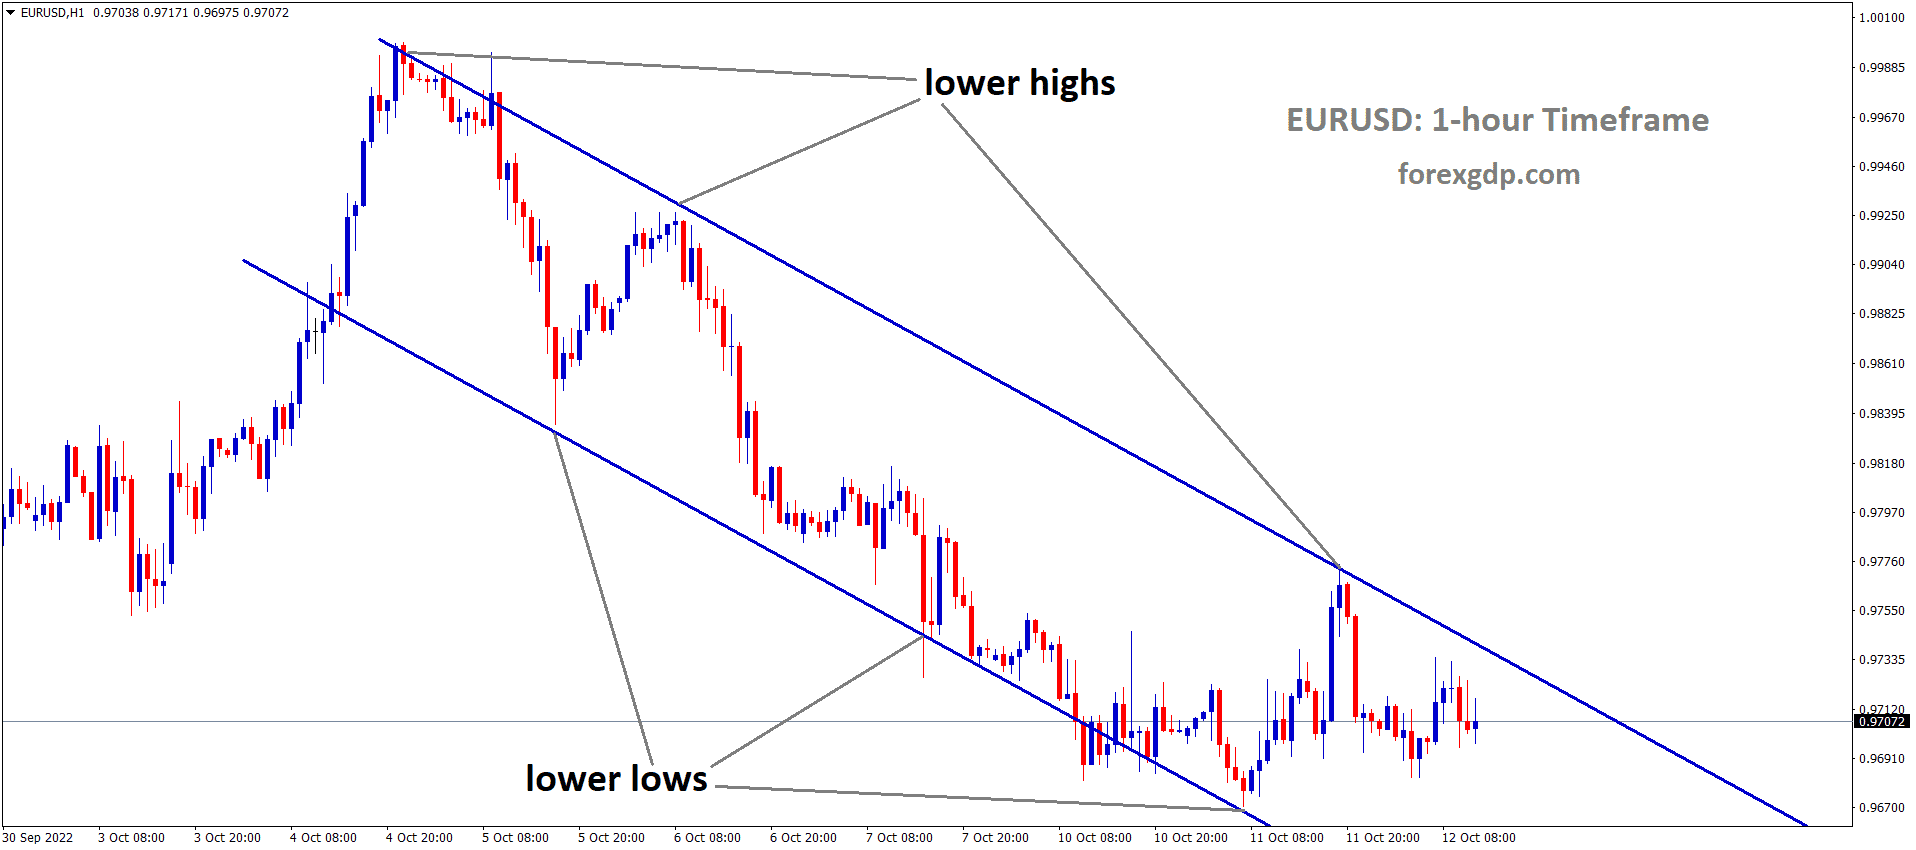 EURUSD is moving in the Descending channel and the market has fallen from the lower high area of the channel 1